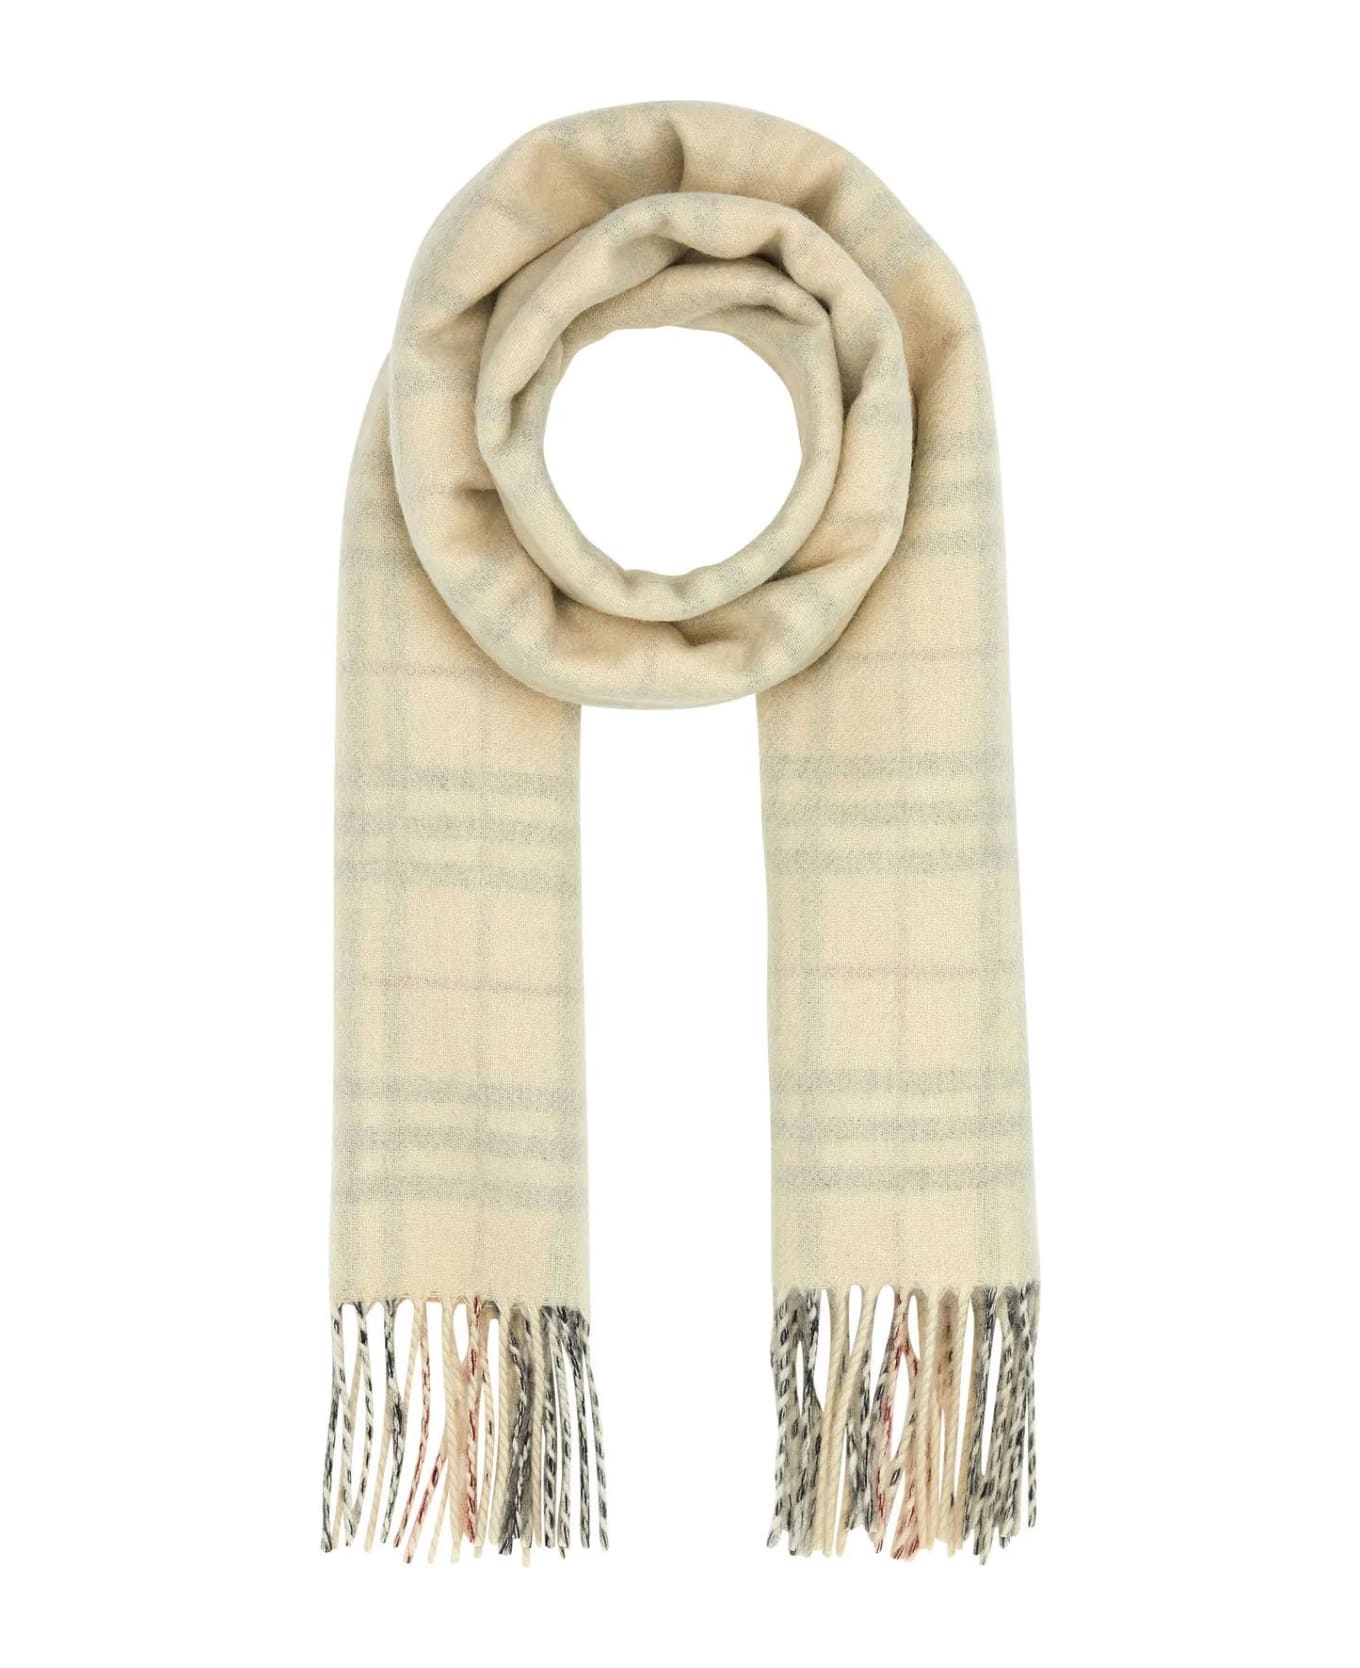 Burberry Embroidered Cashmere Scarf スカーフ